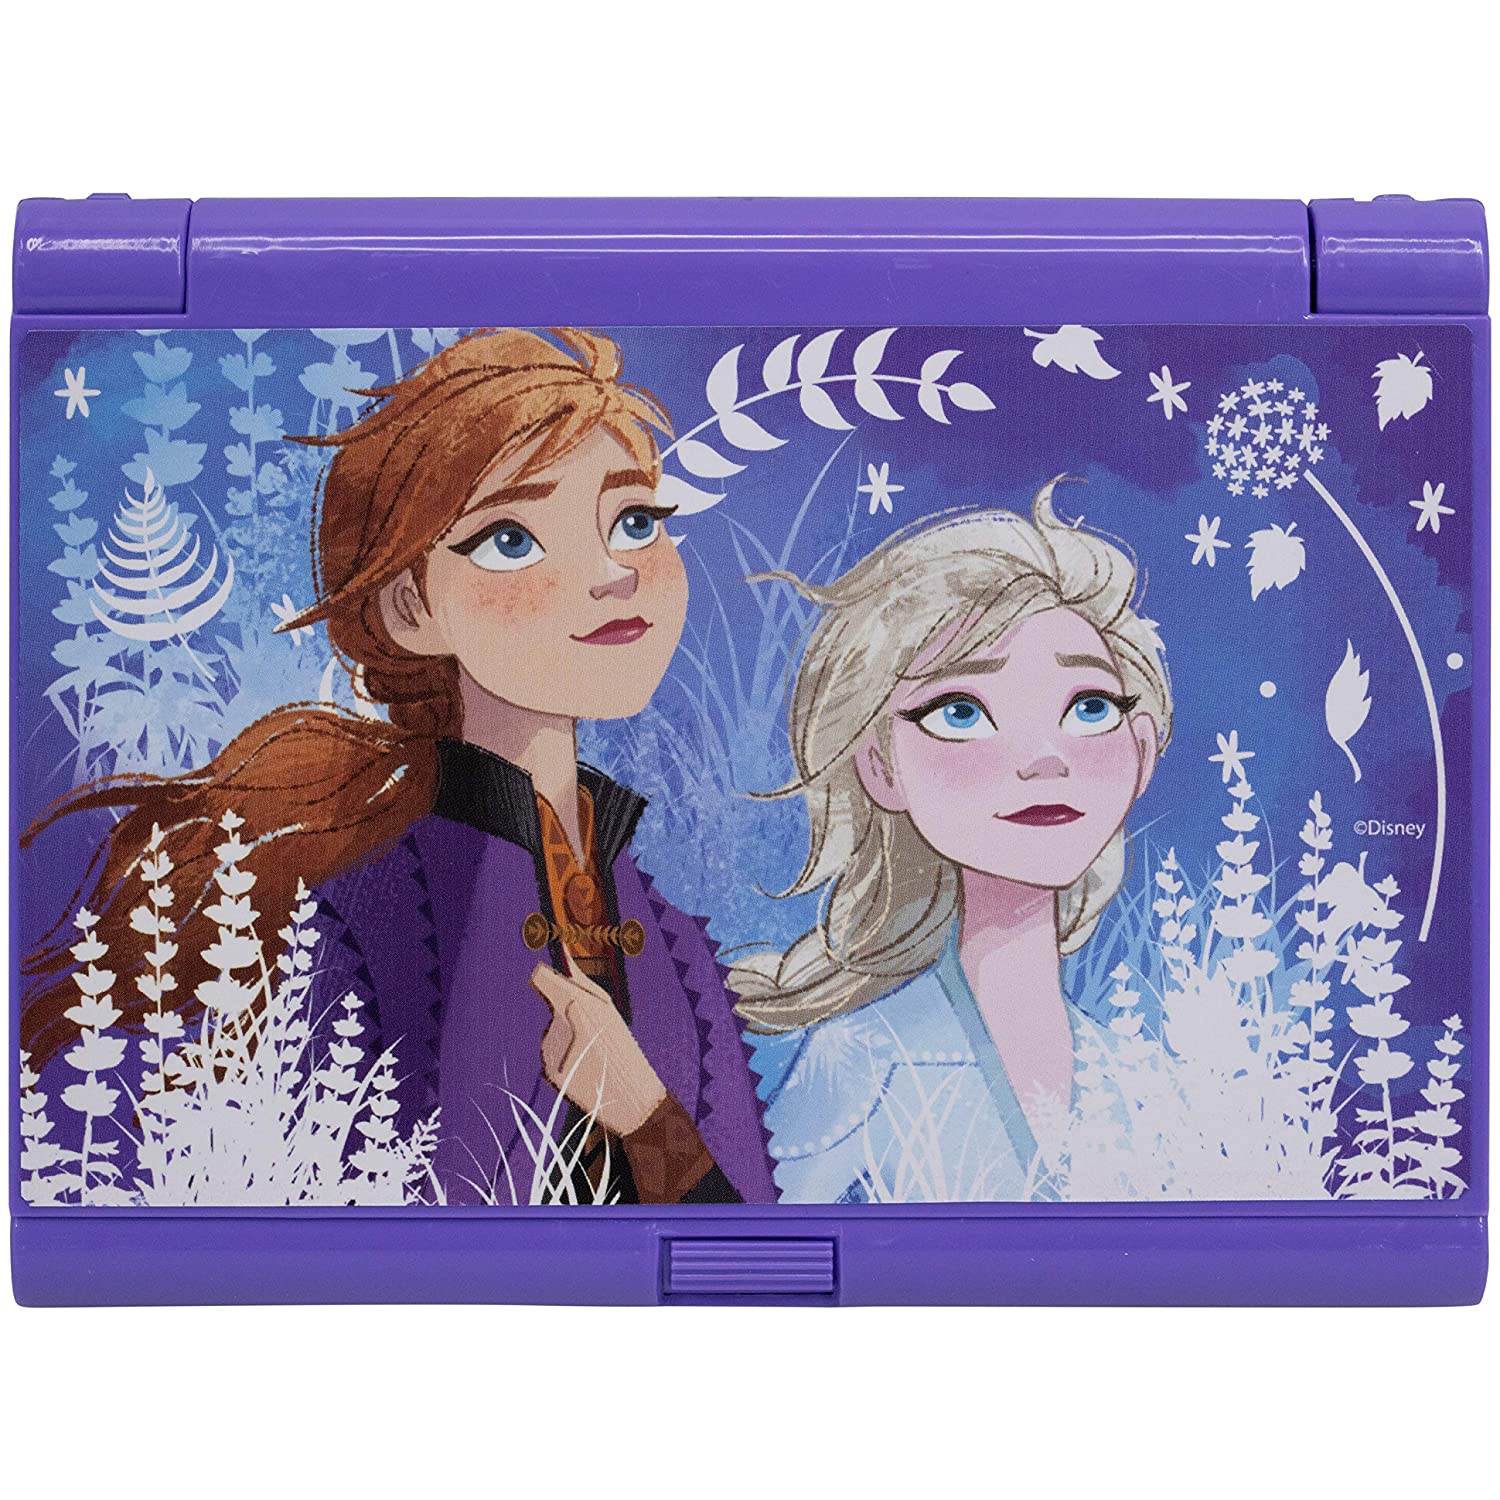 Disney Frozen 2 - Townley Girl Cosmetic Compact Set with Mirror 22 lip glosses, 4 Body Shines, 6 Brushes Colorful Portable Foldable Washable Make Up Beauty Kit Box Set for Girls Kids Toddler